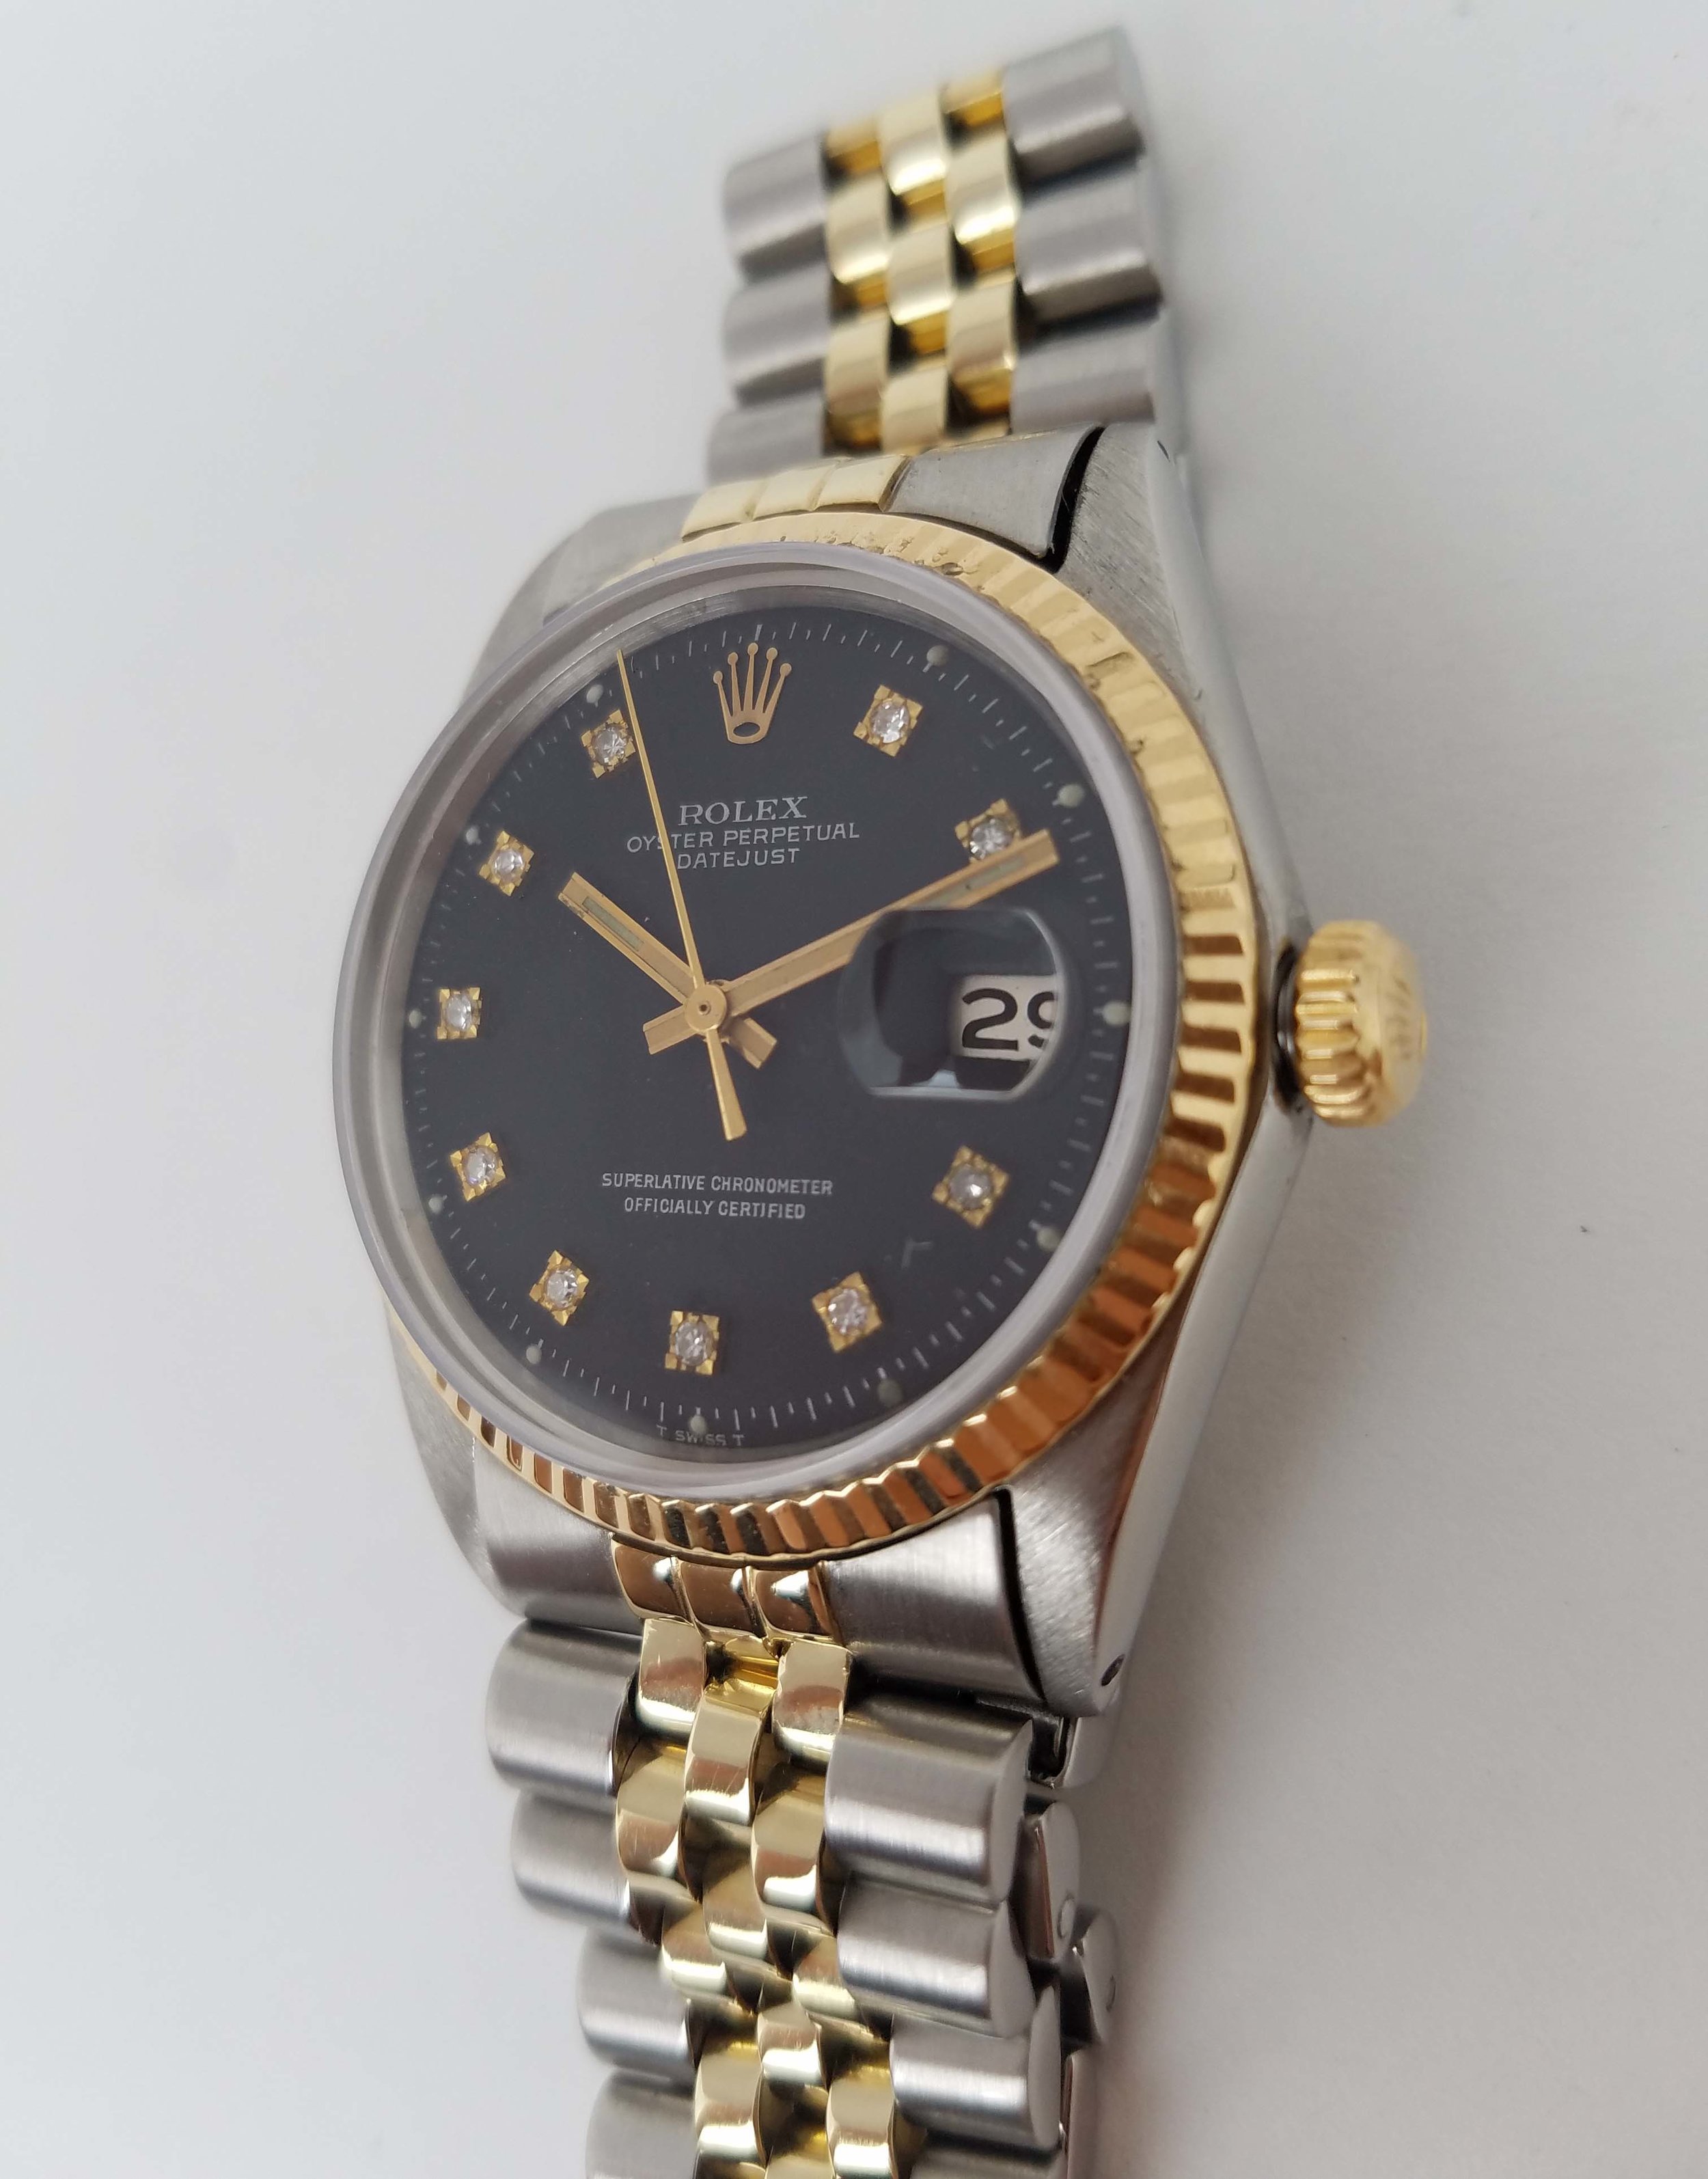 Rolex Oyster Perpetual Datejust 1570 